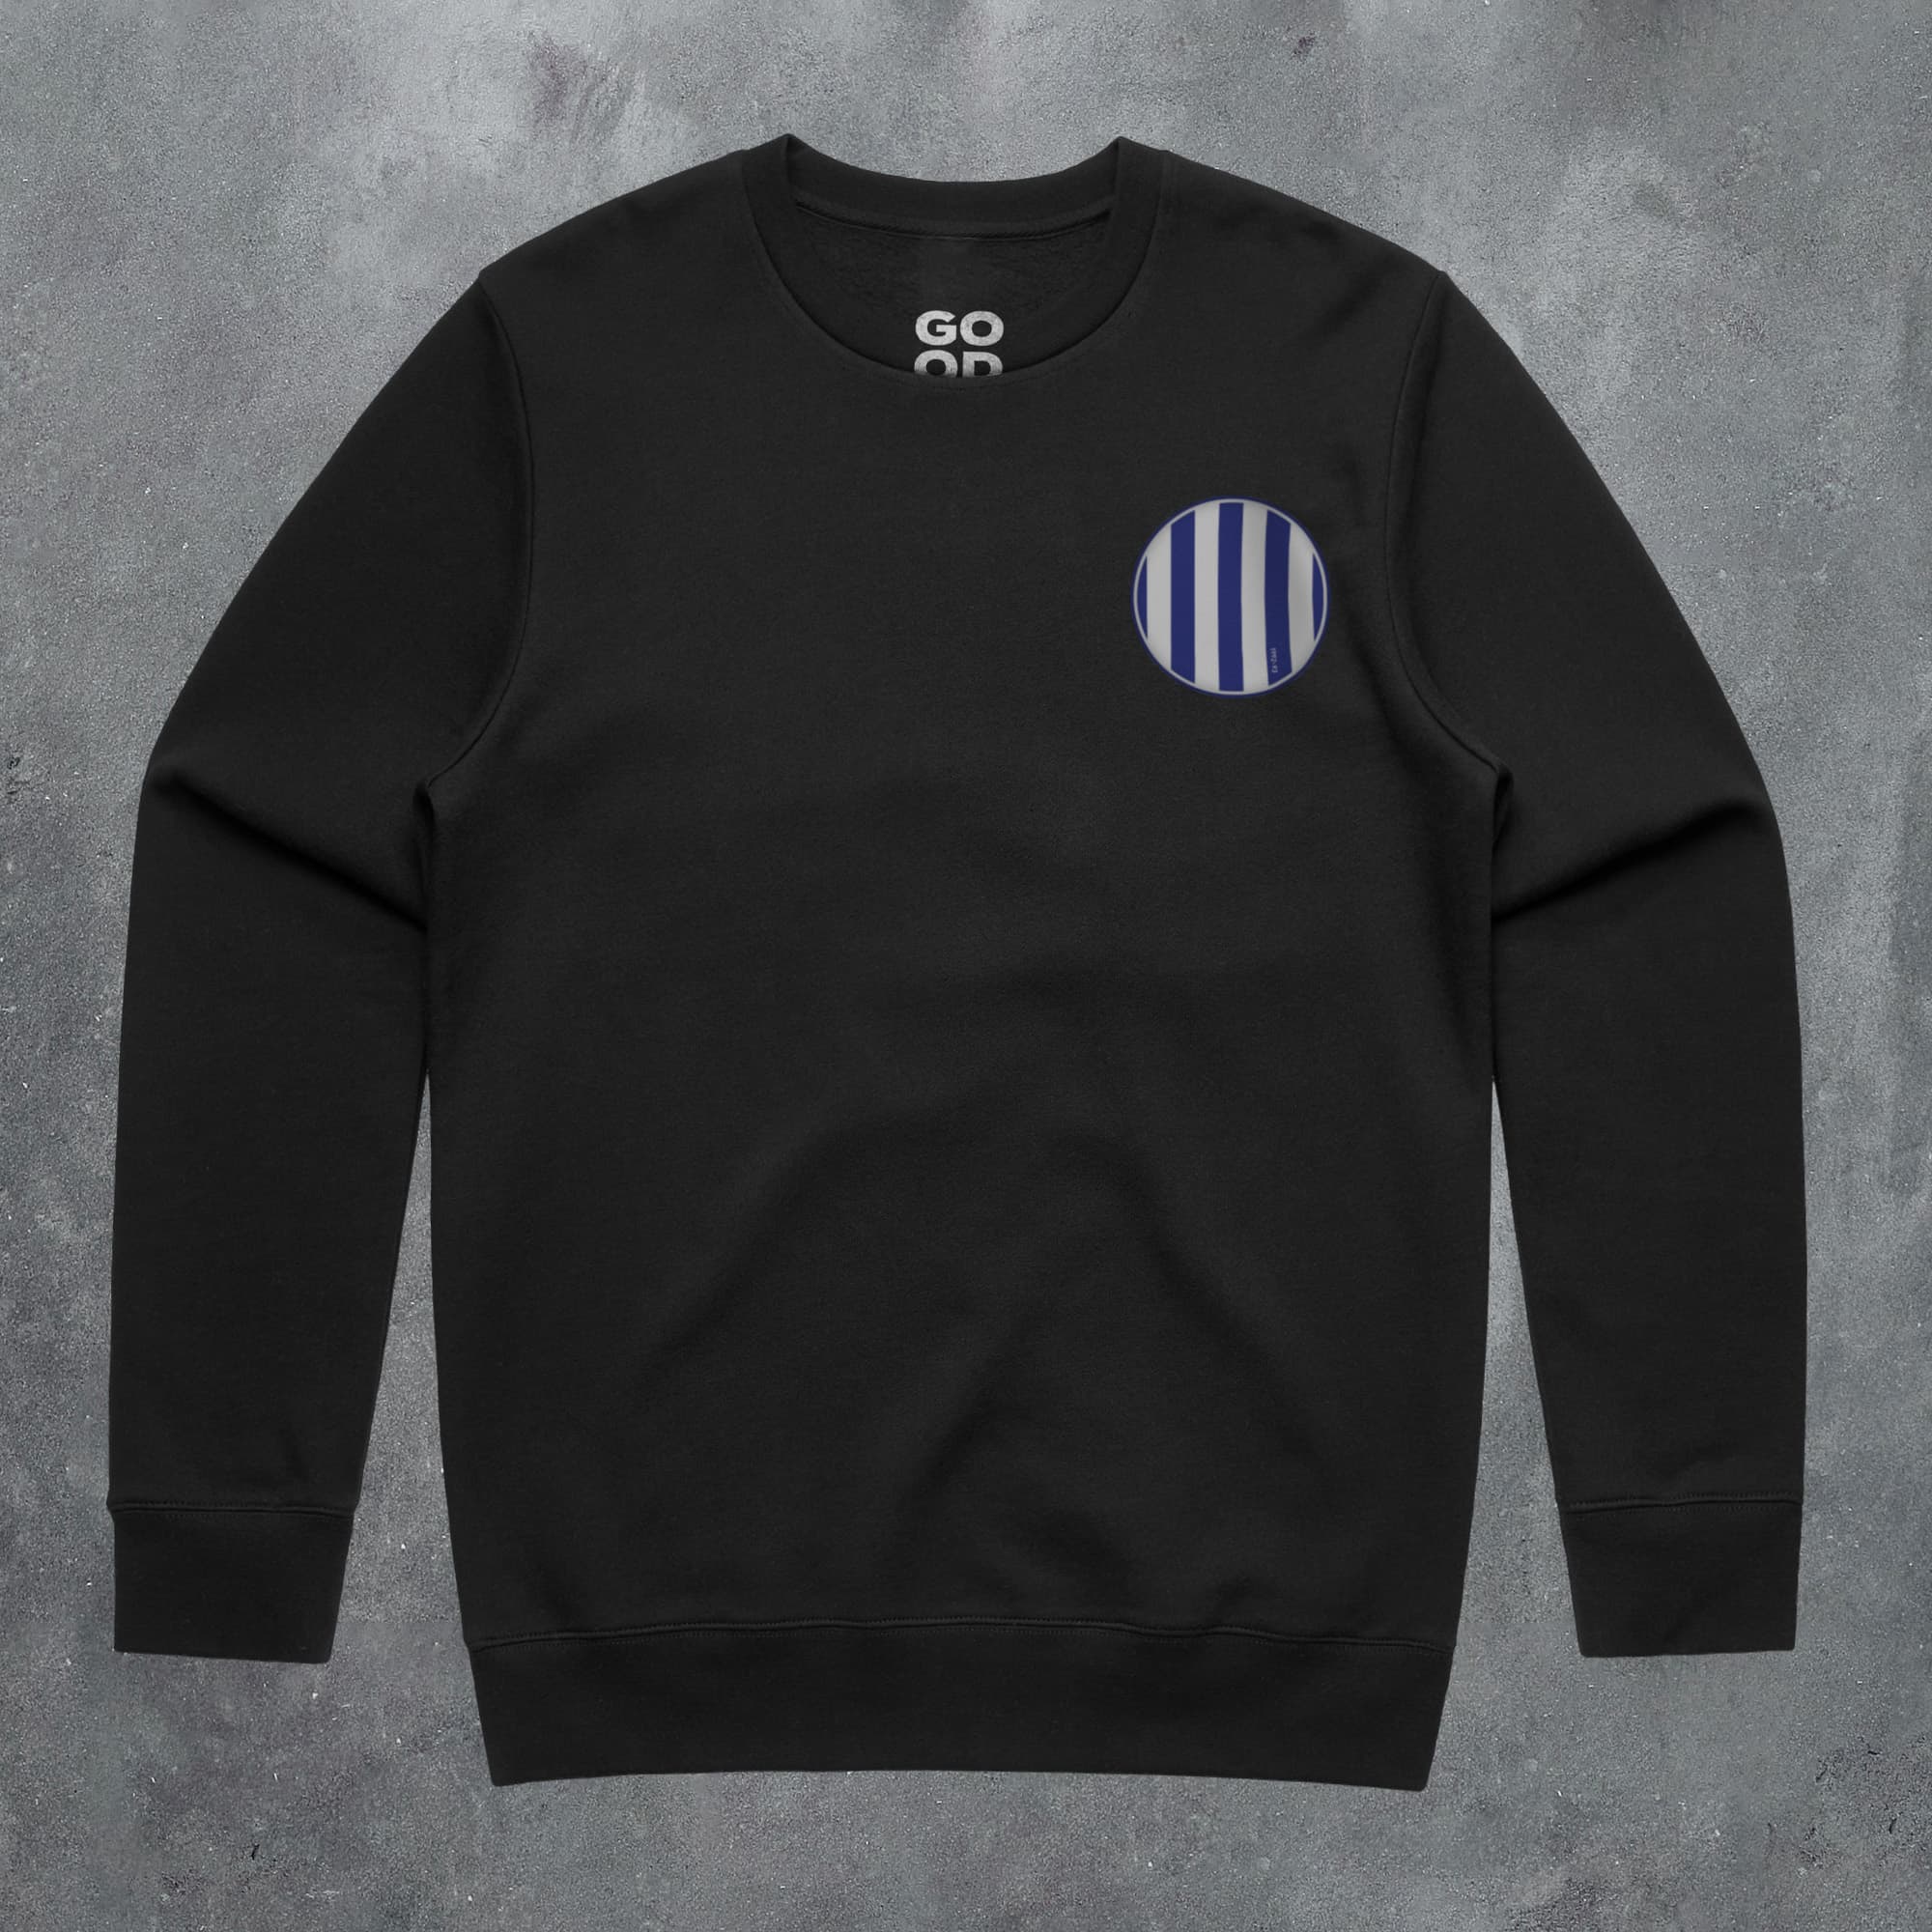 a black sweatshirt with a blue and white circle on it